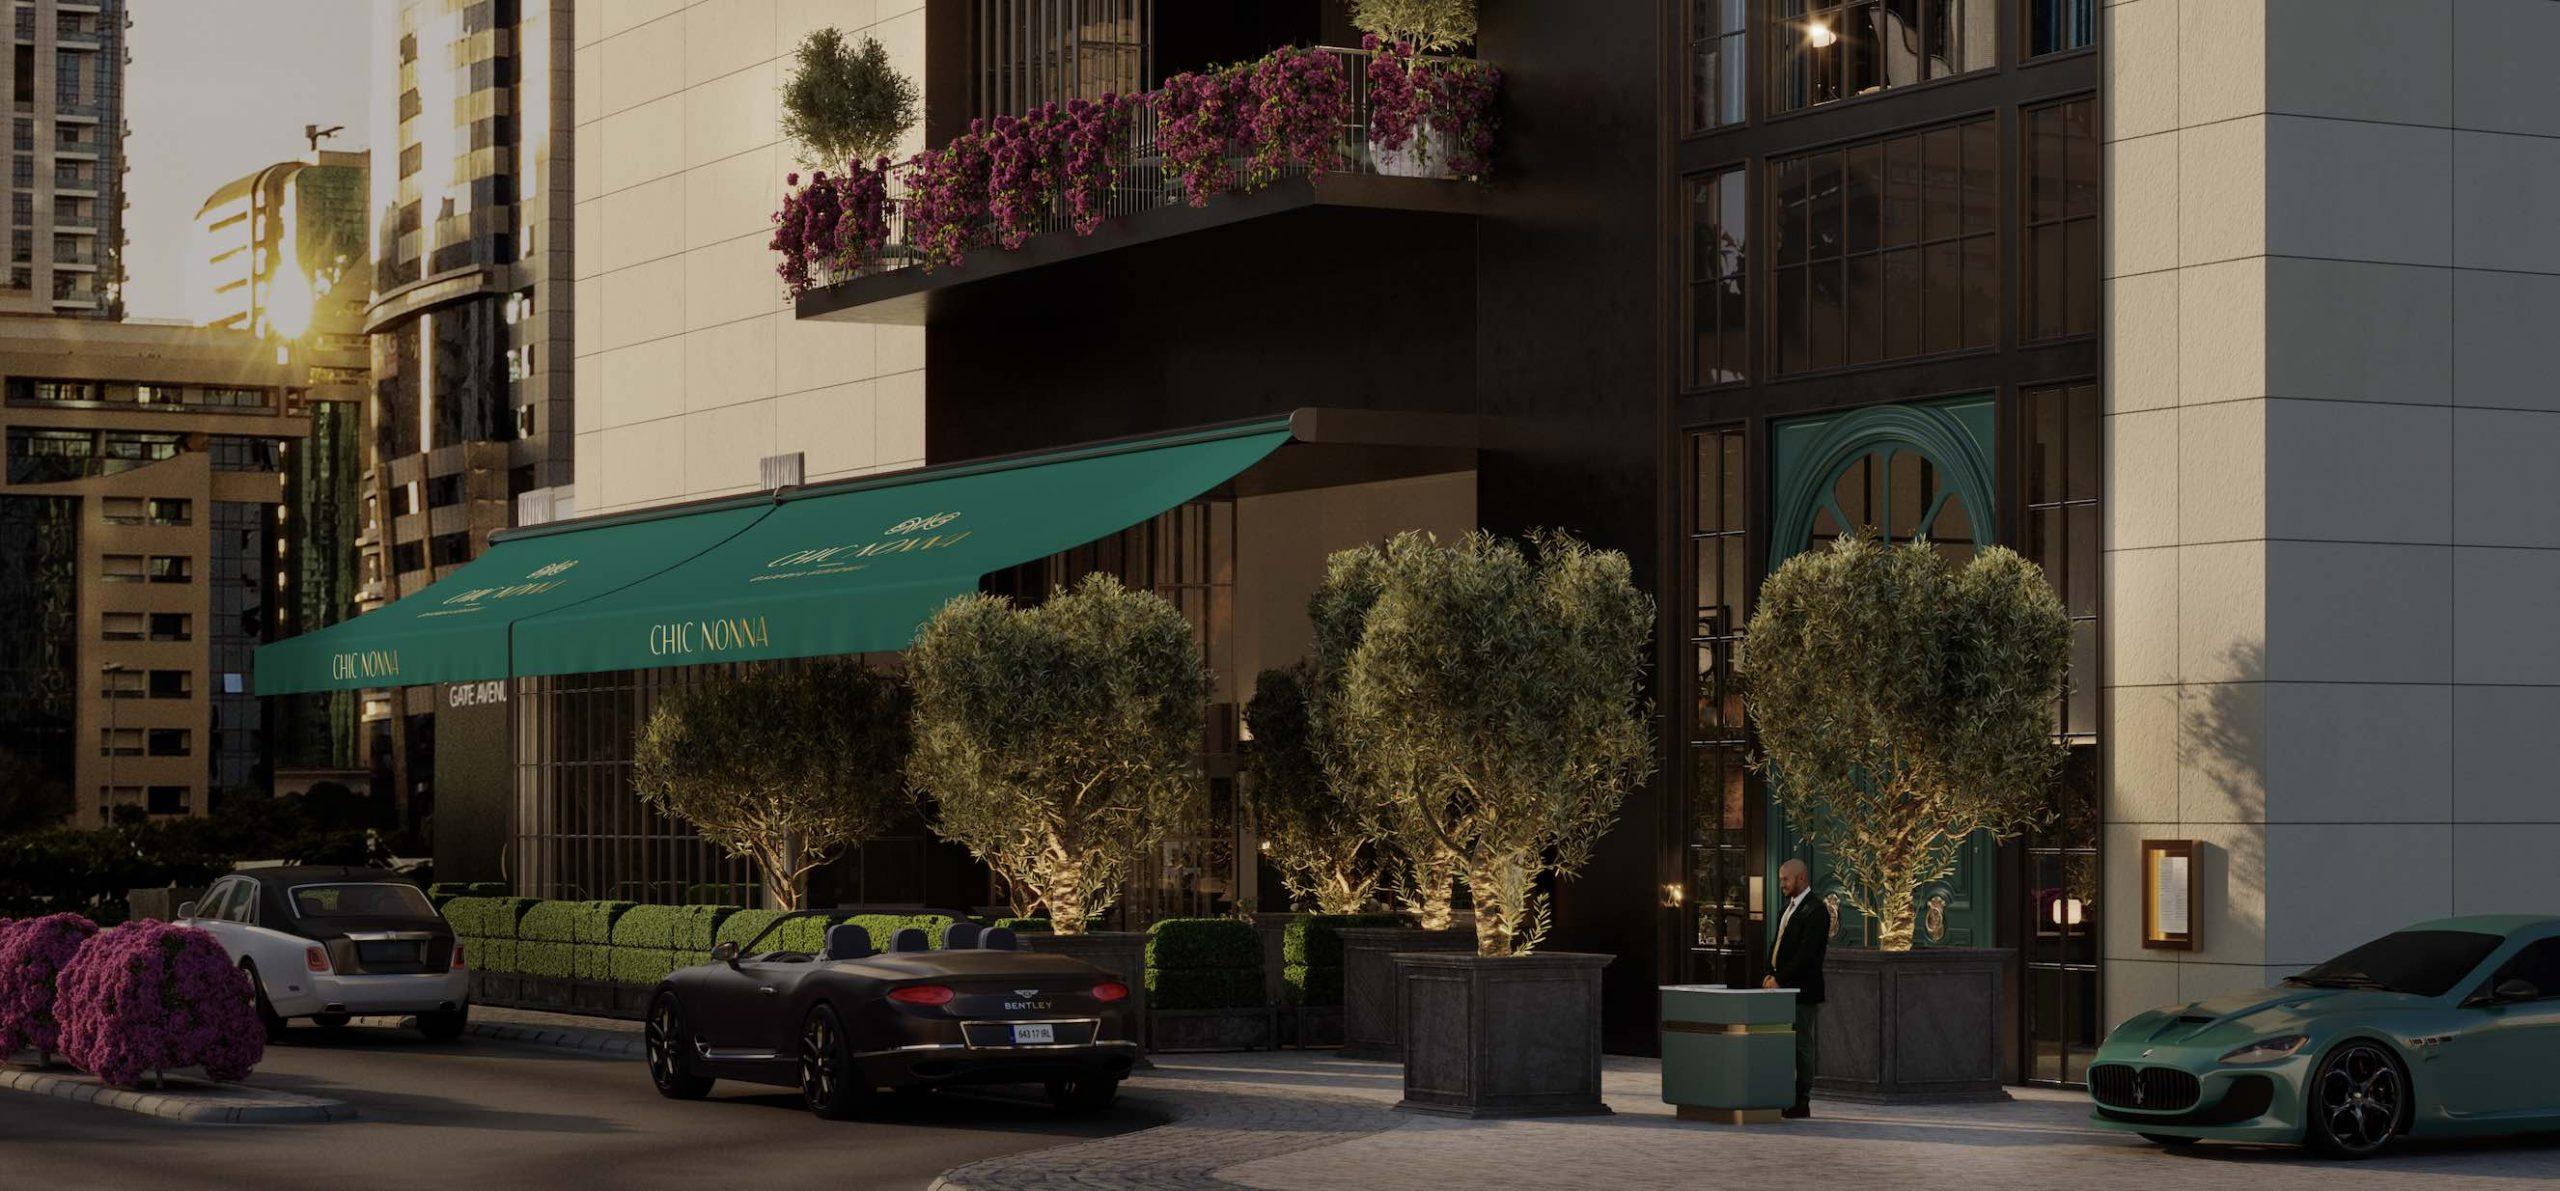 Chic Nonna Restaurant &#038; Lounge is setting its sights on DIFC